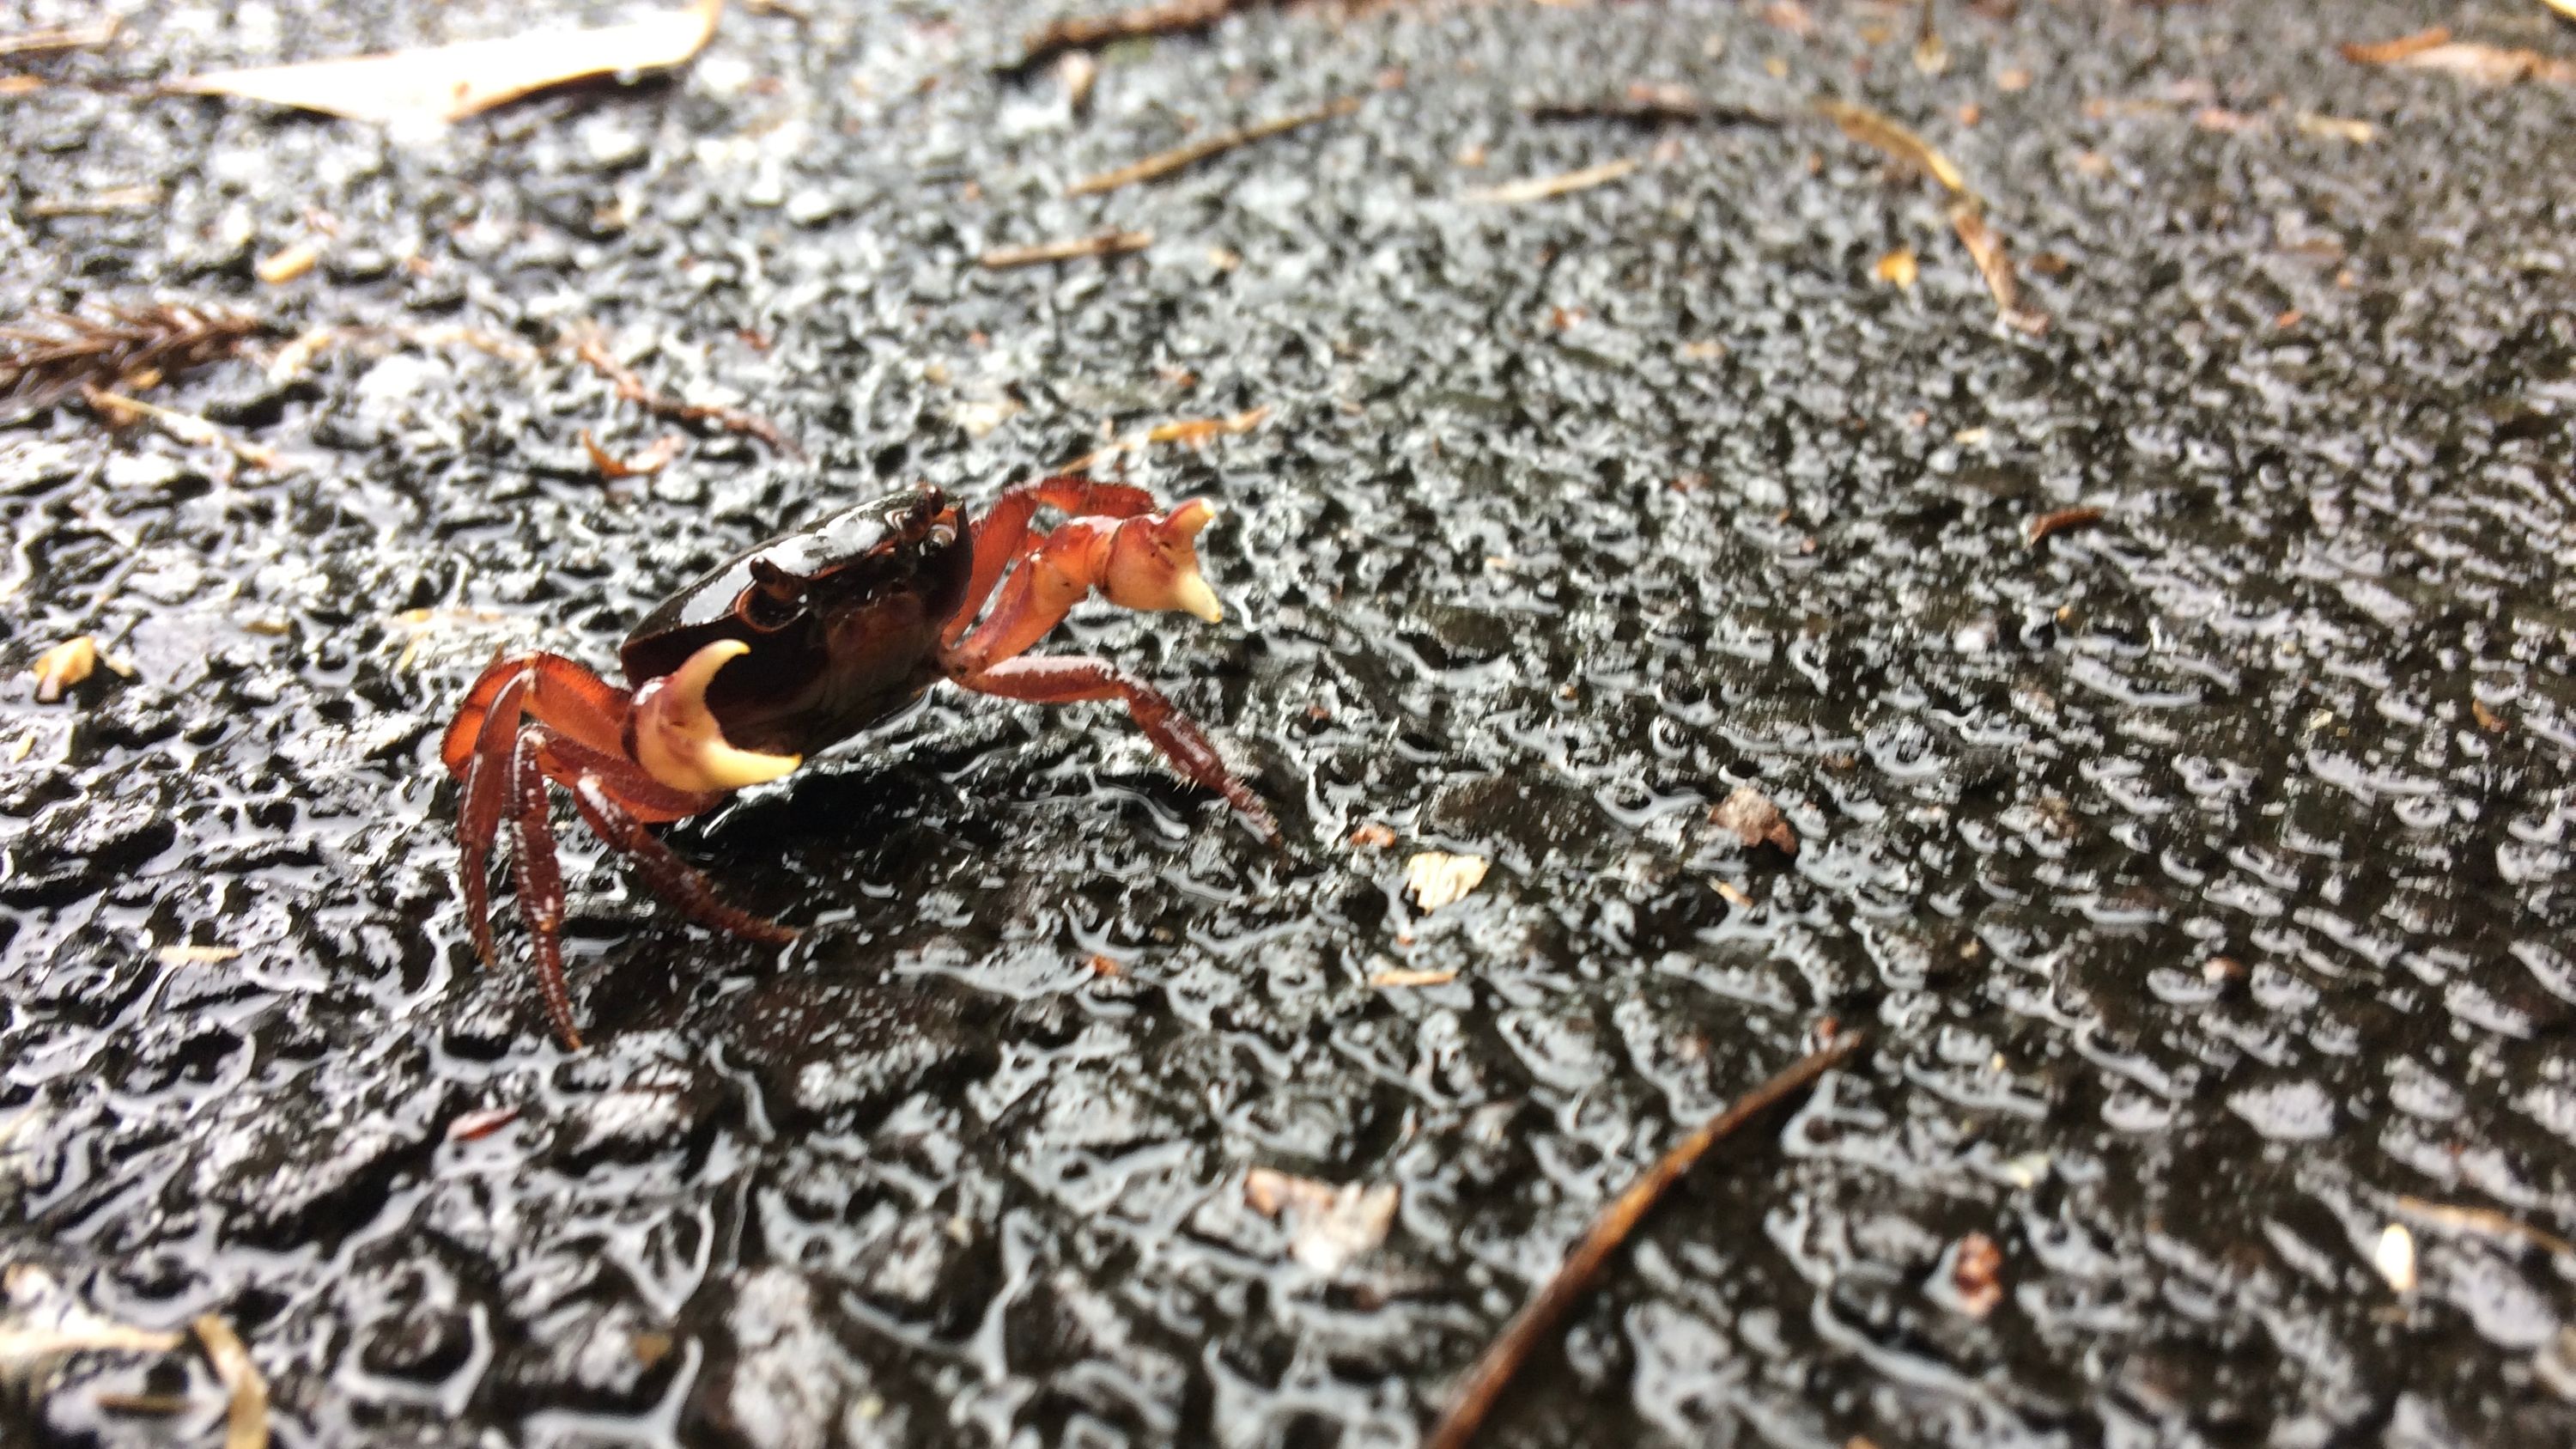 A small red land crab on a wet patch of asphalt.